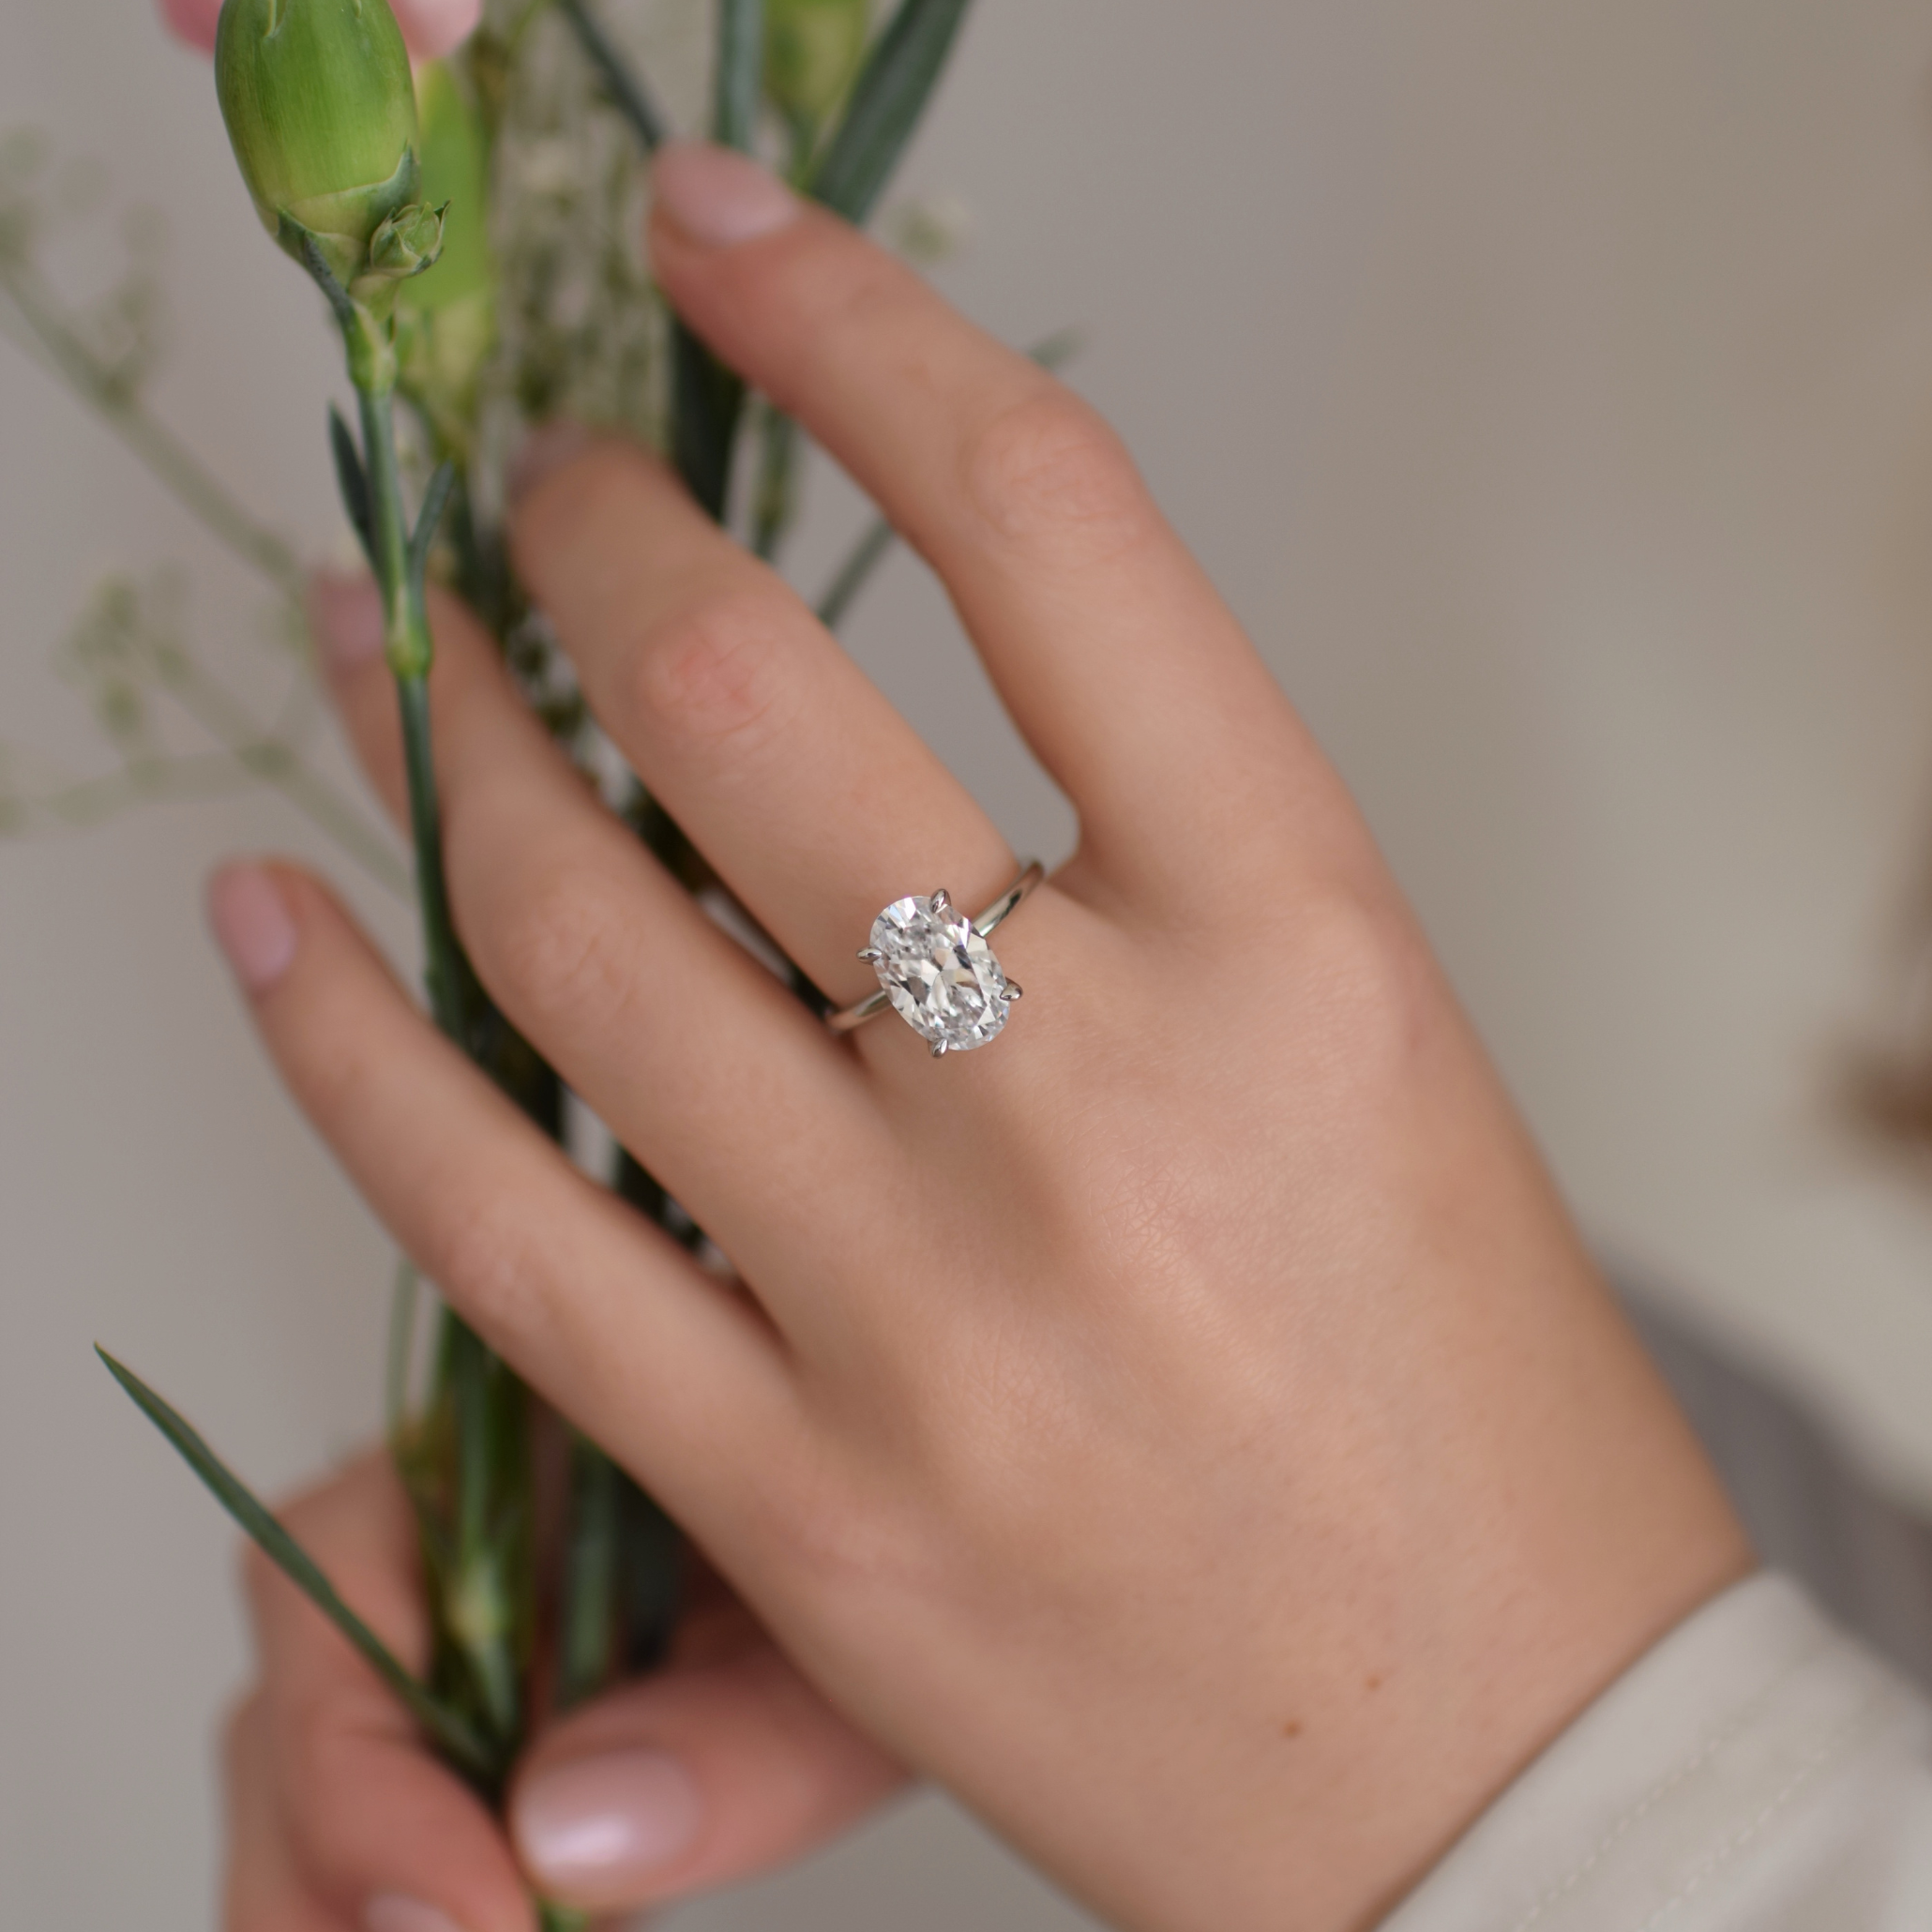 The Promise Ring Co. Oval Solitaire diamond simulant ring. In 18ct Gold or Sterling Silver.